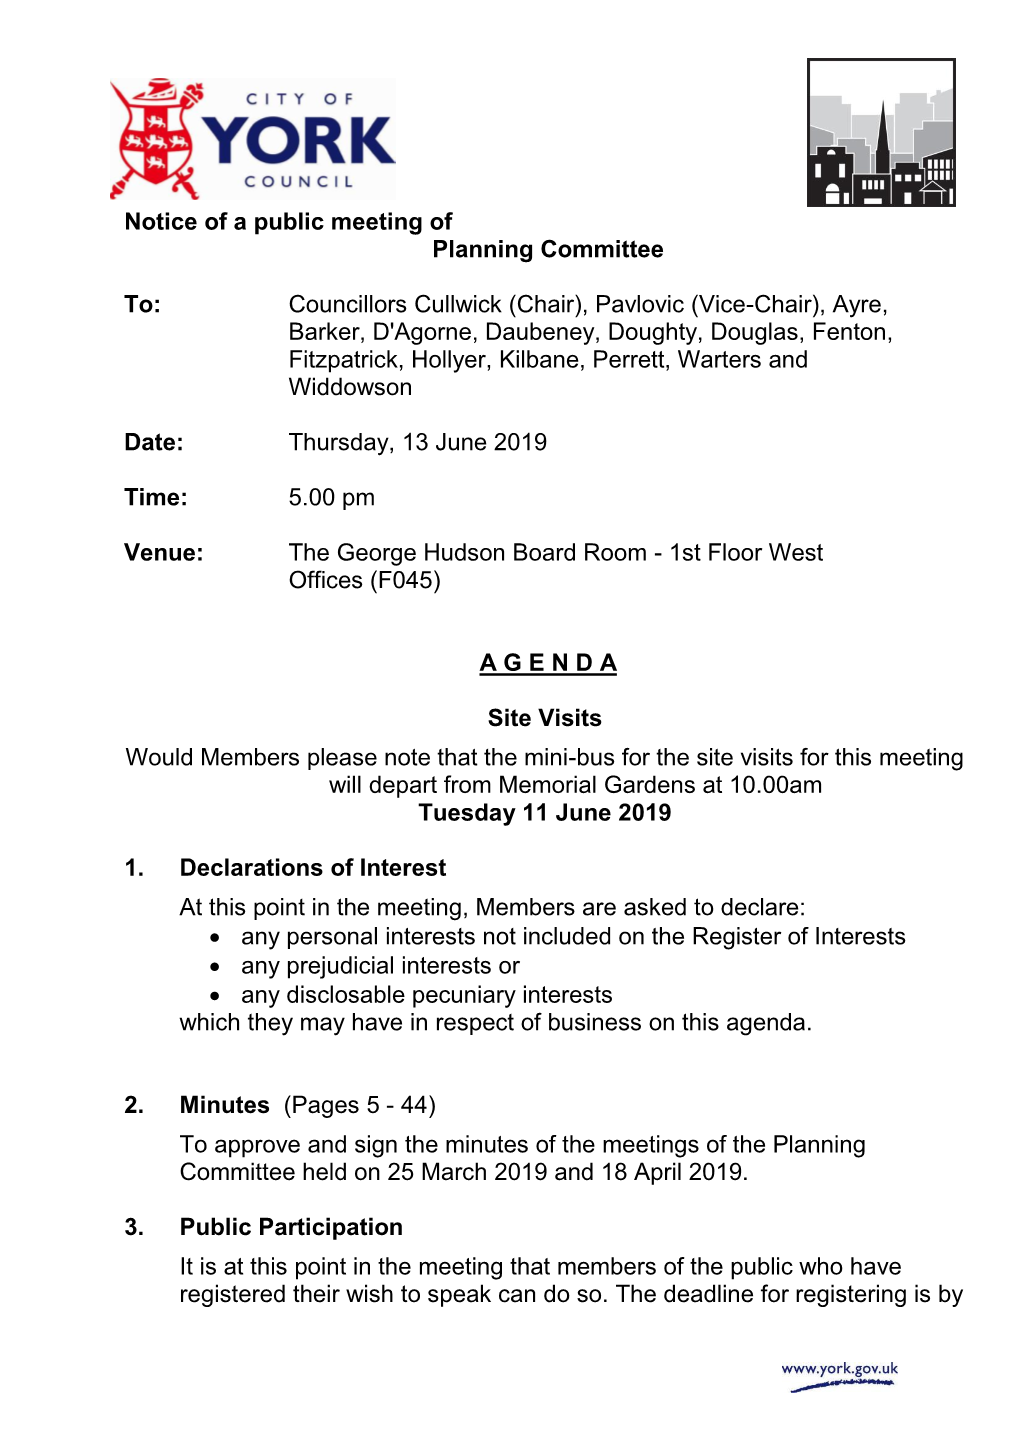 (Public Pack)Agenda Document for Planning Committee, 13/06/2019